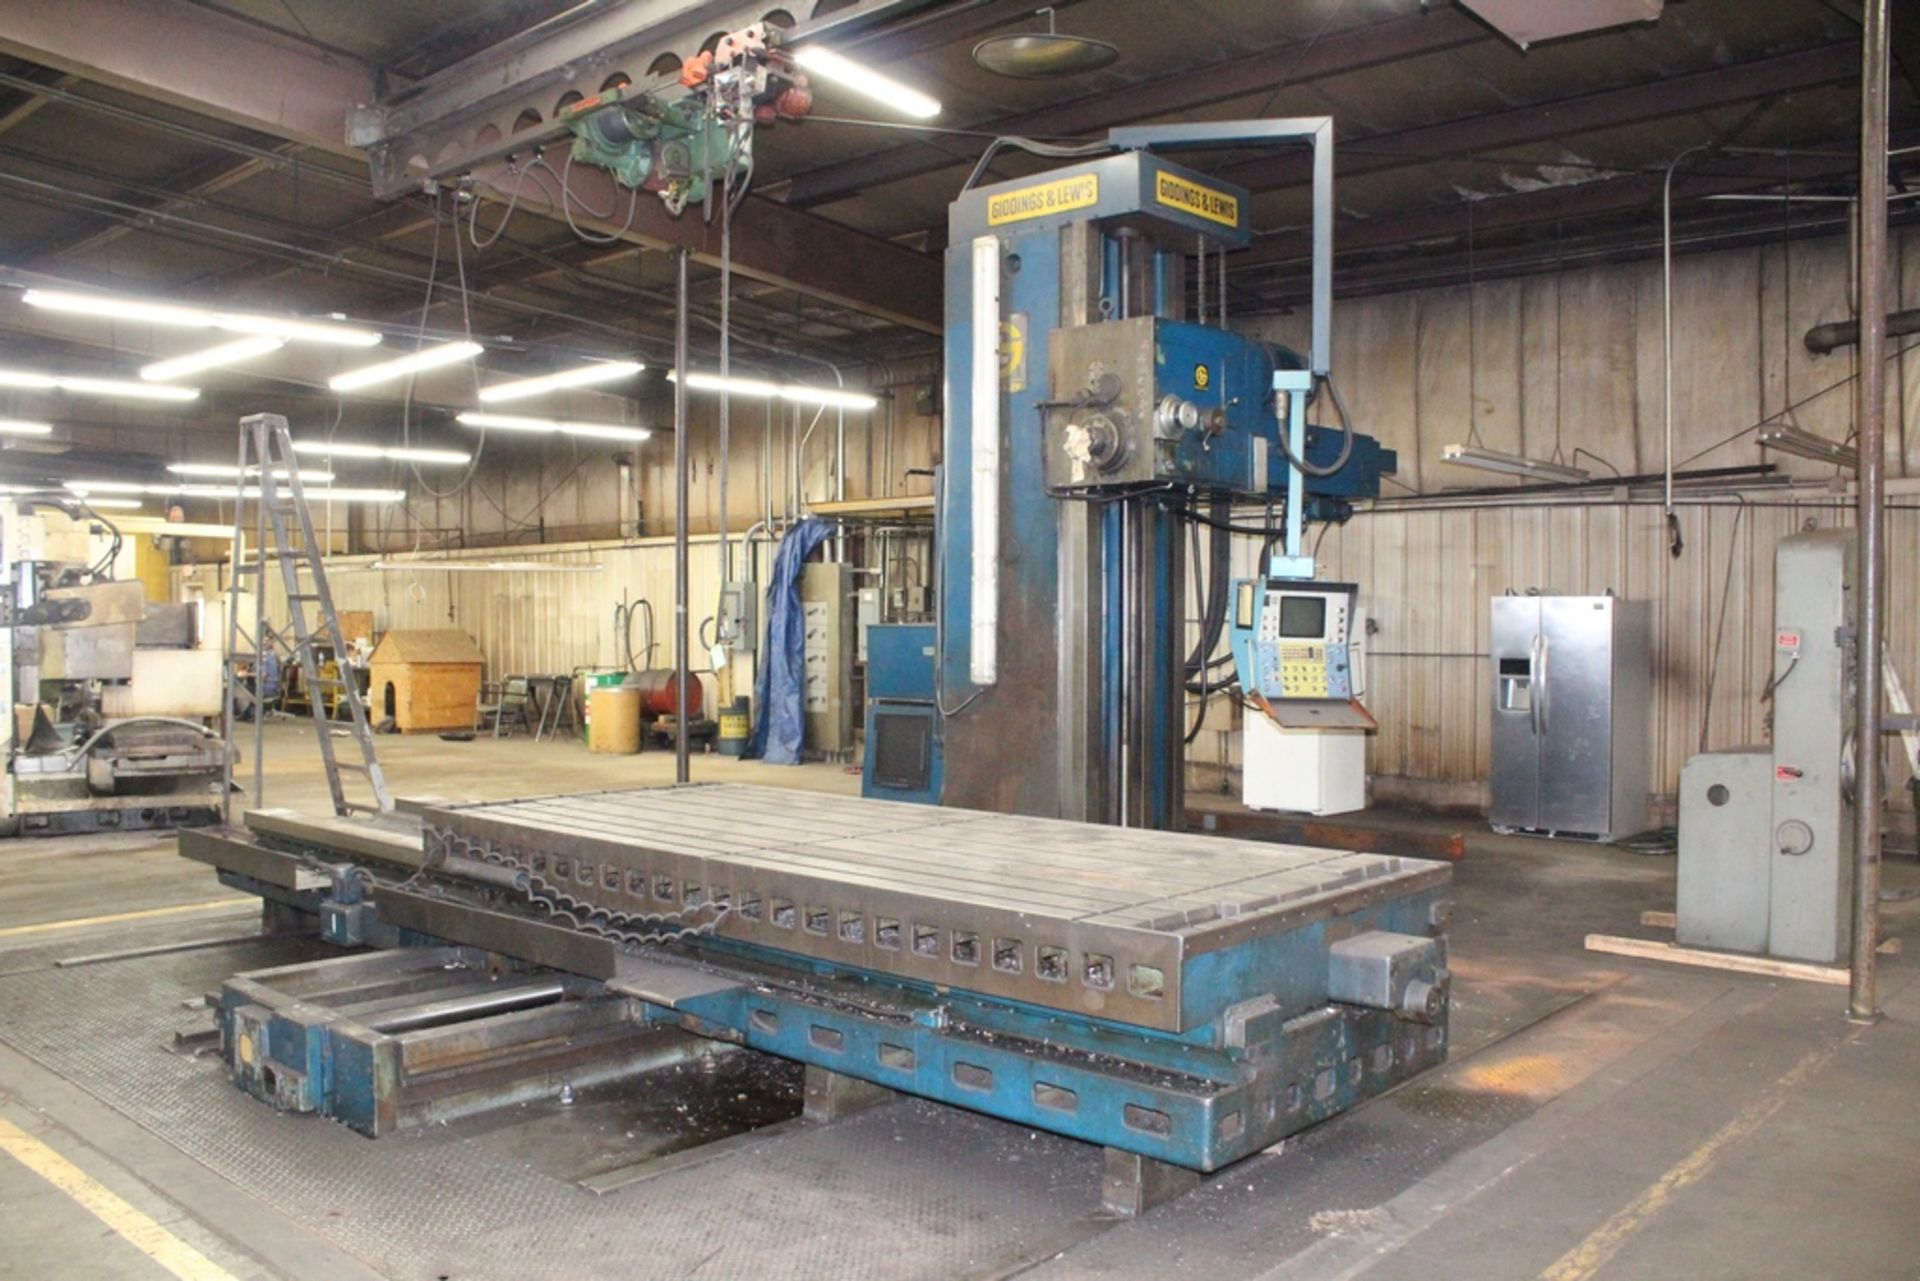 6” GIDDINGS & LEWIS MODEL 70-H6-T TABLE TYPE HORIZONTAL BORING MILL, 60” X 144” TABLE,